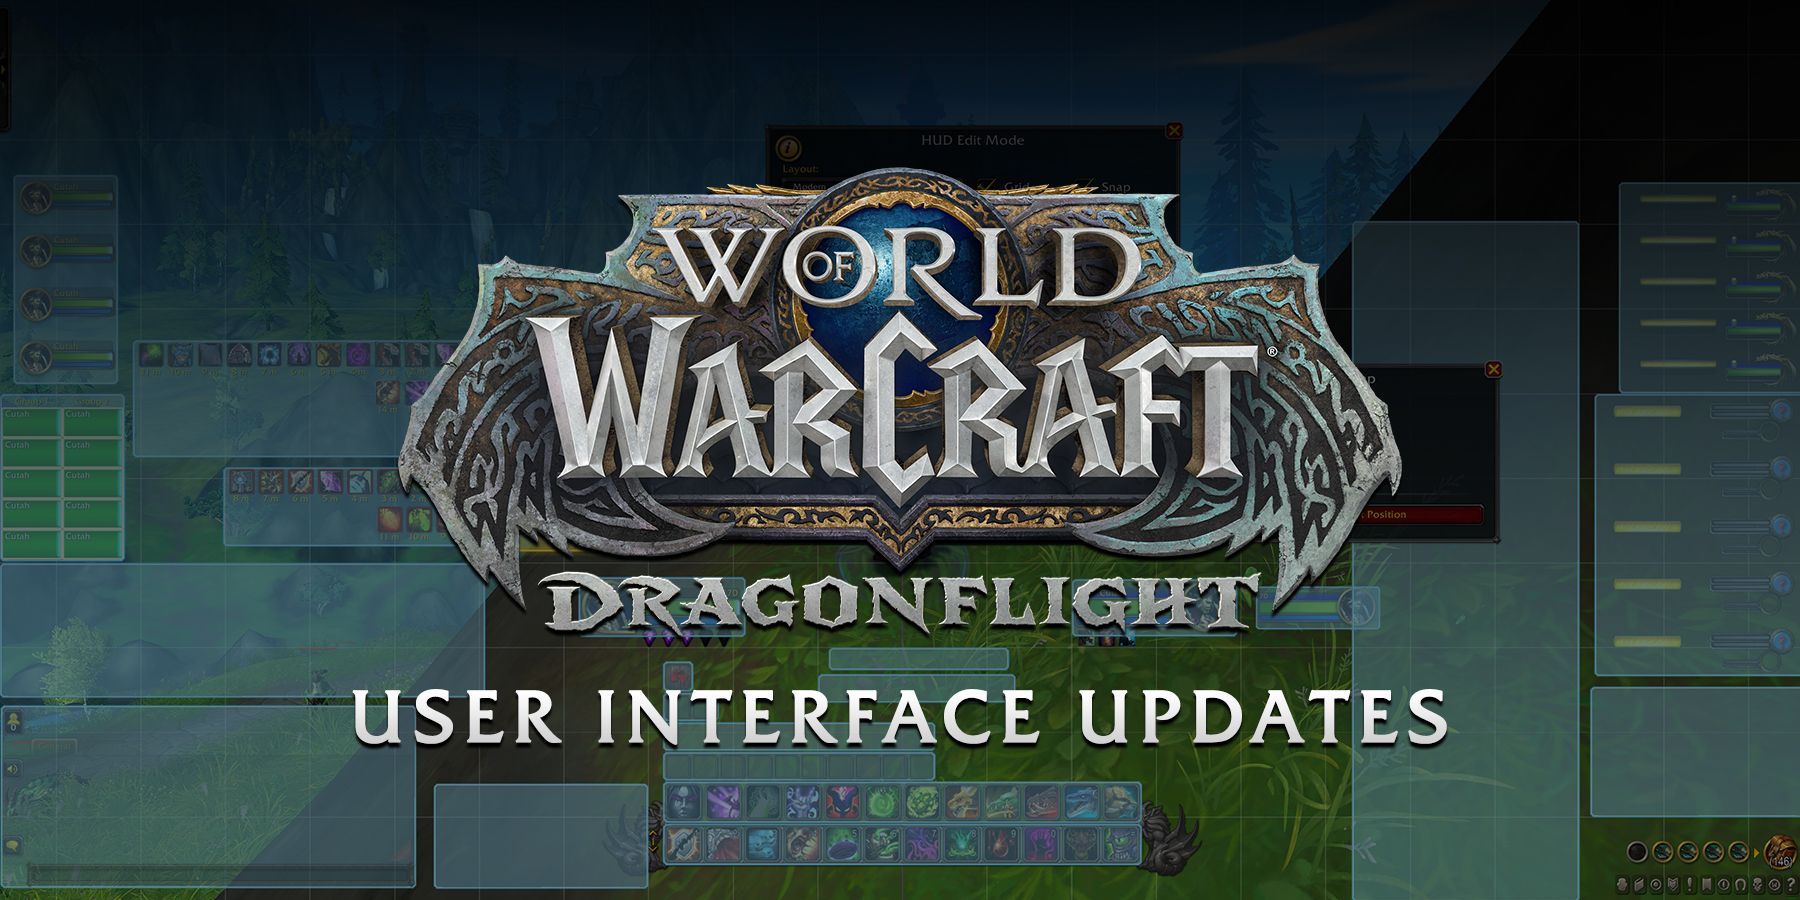 wow world of warcraft ui update in dragonflight patch 10.0.5